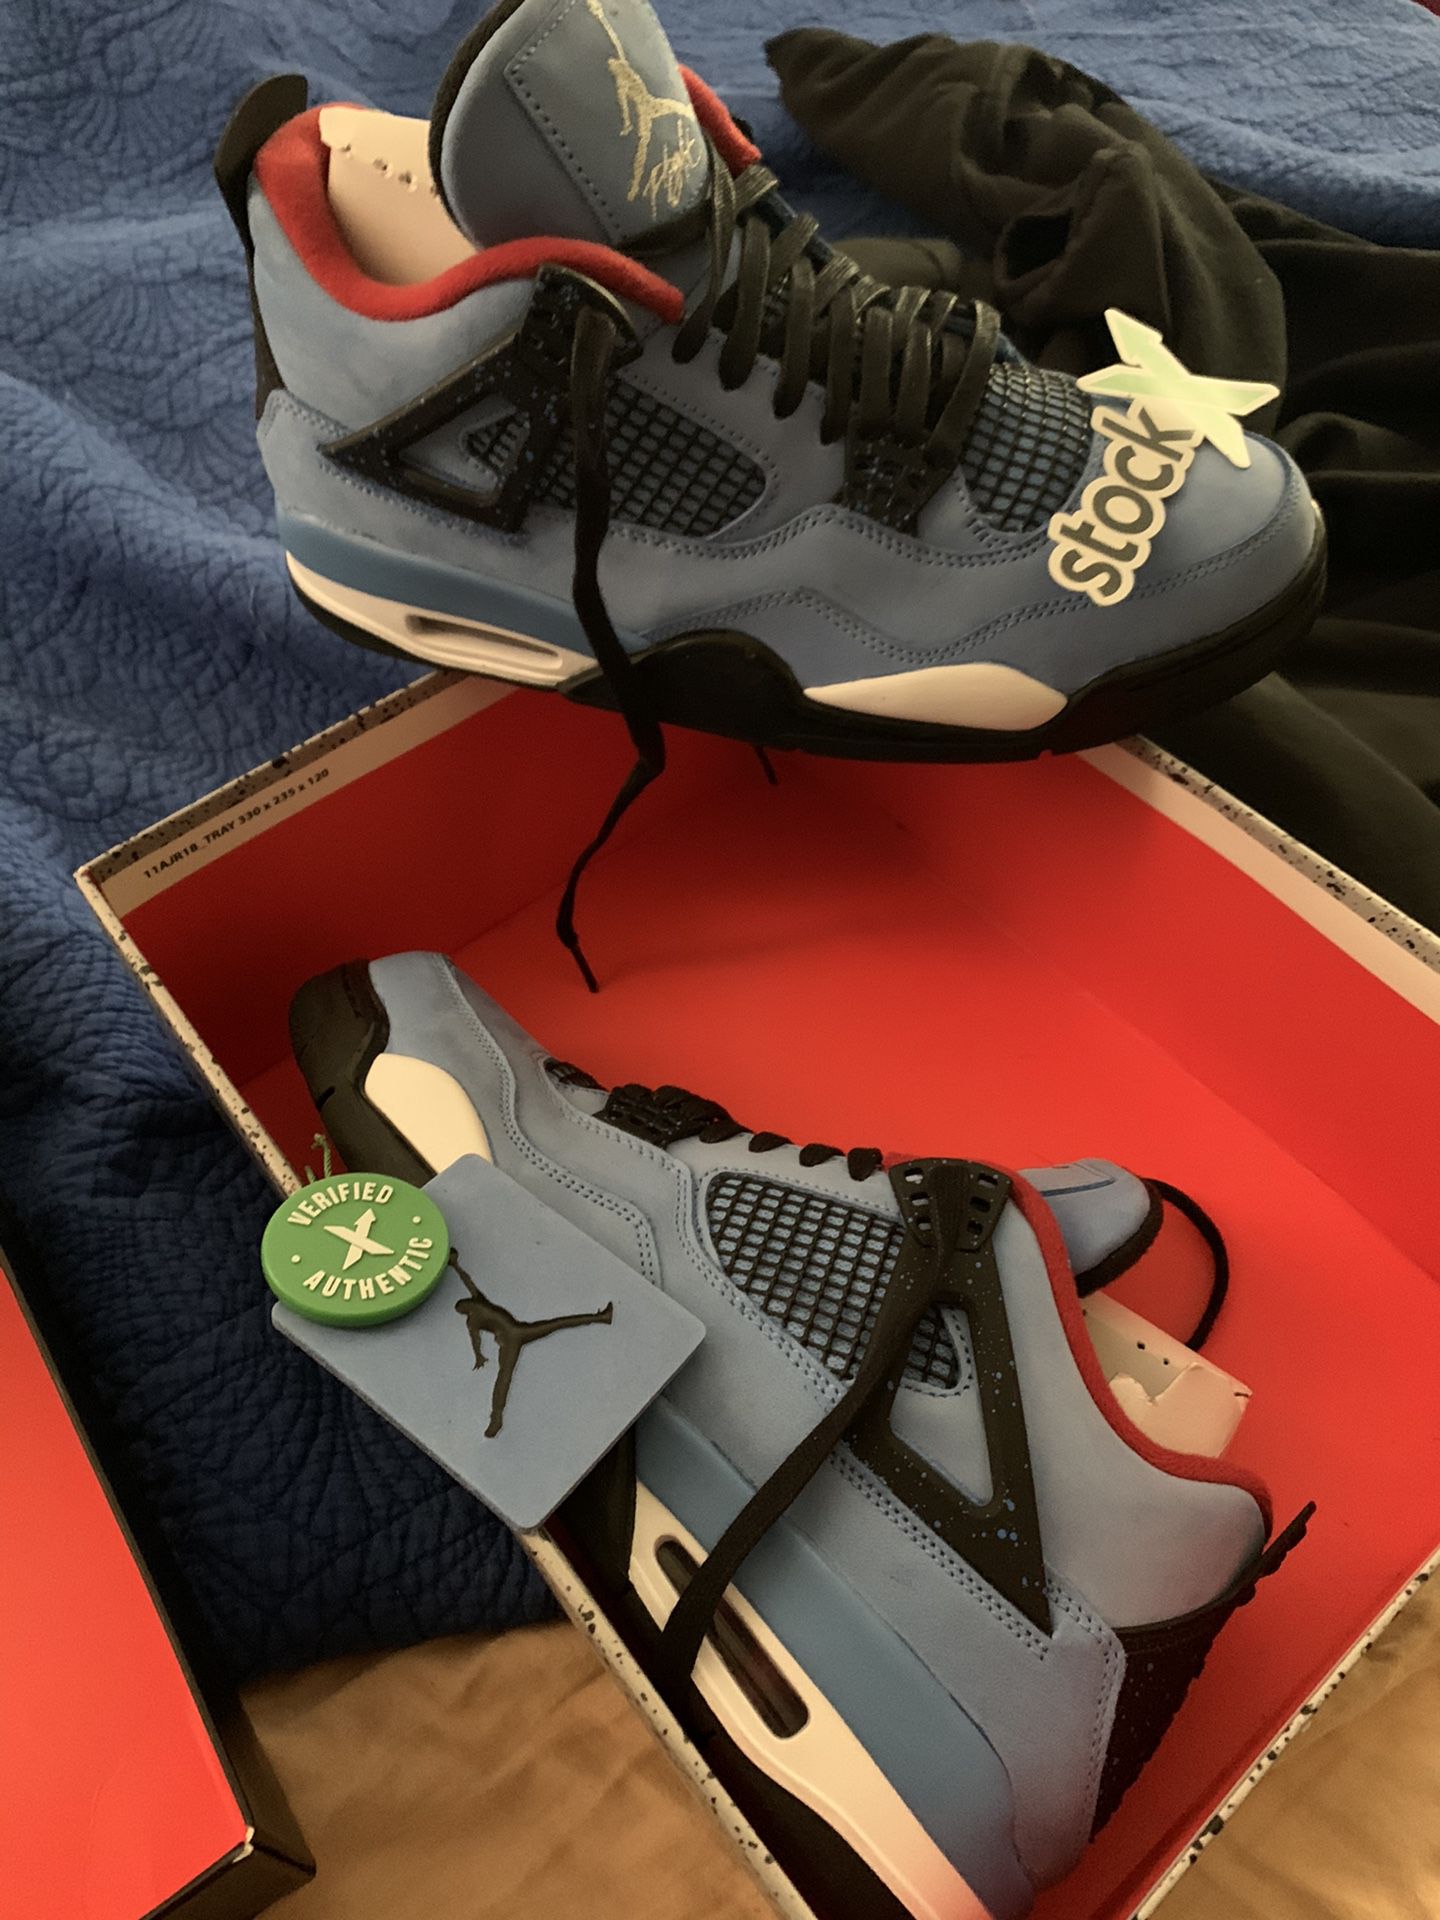 Jordan retro 4 cactus jacks brand new condition from stock x 450 or best offer